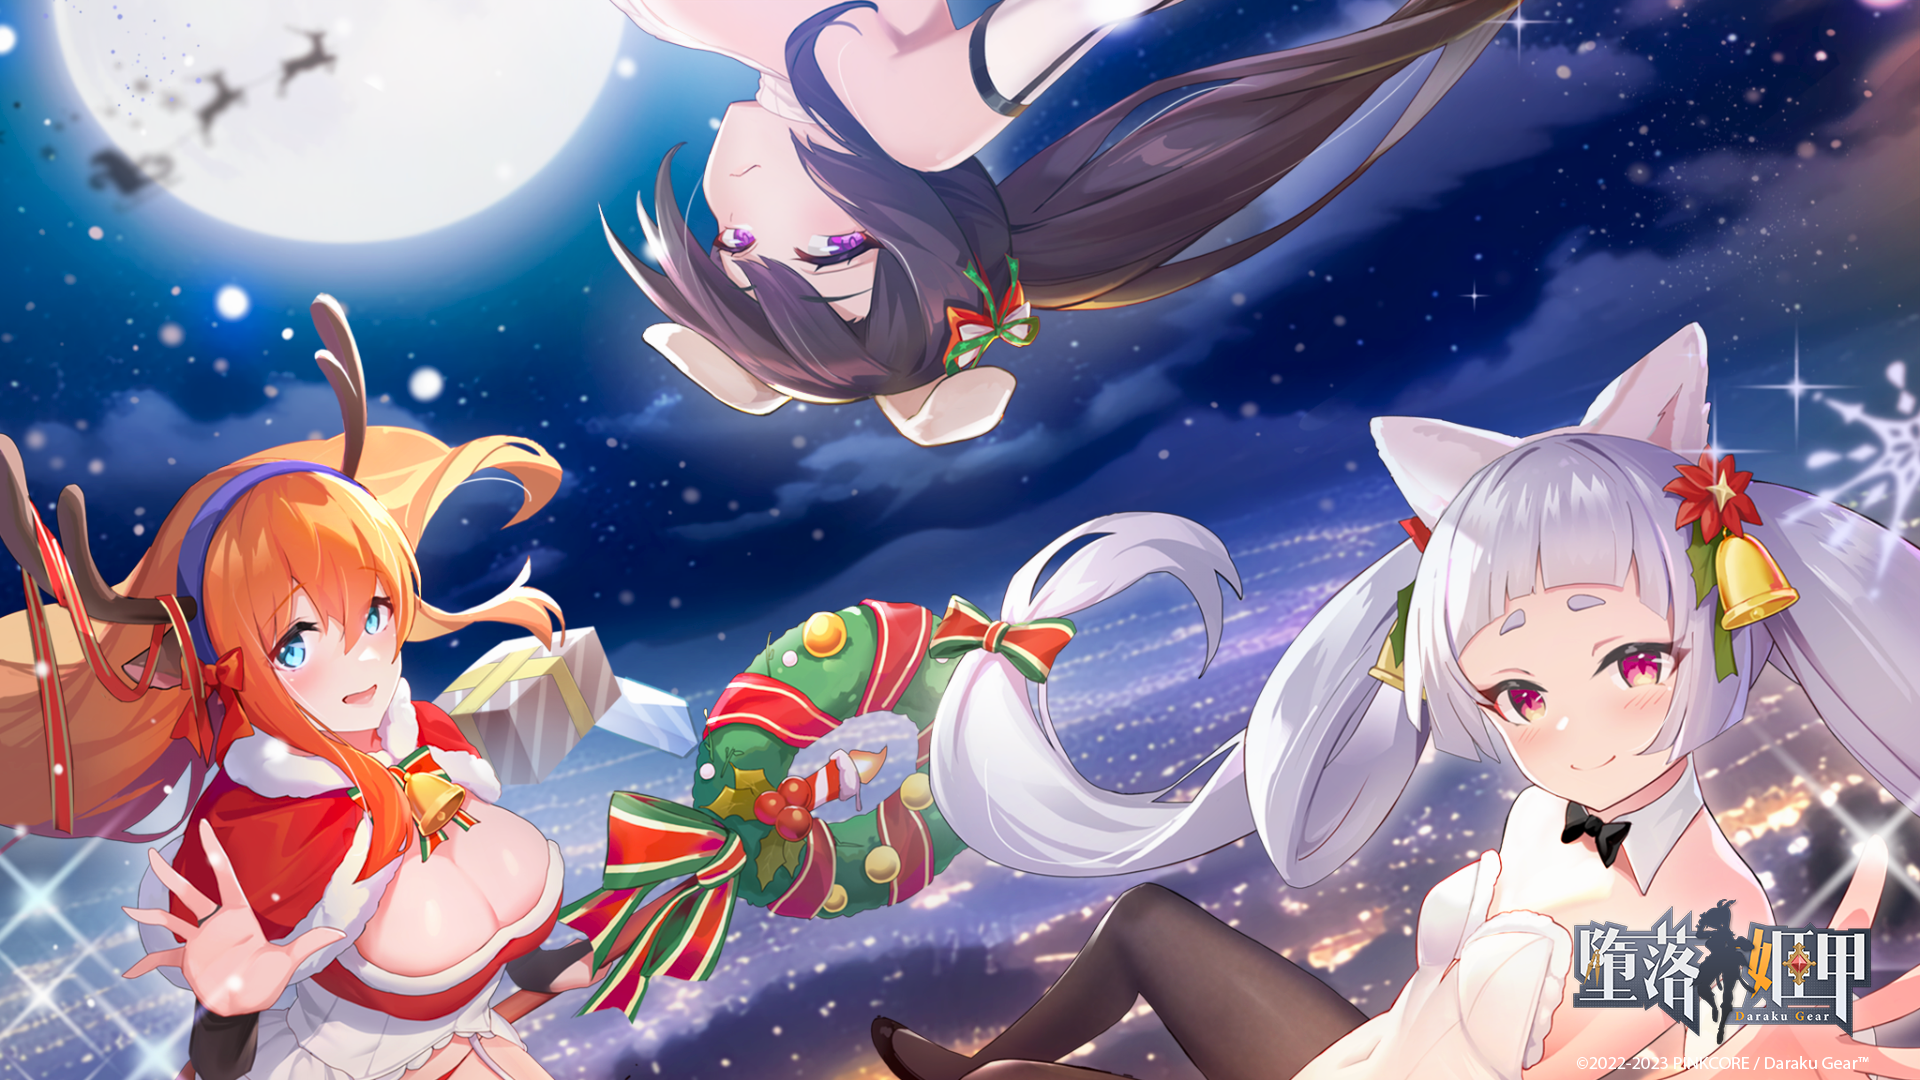 Anime 1920x1080 daraku gear anime girls Christmas women trio Christmas clothes Moon bunny suit upside down looking at viewer snow city lights starry night group of women night falling animal ears Christmas ornaments  logo Christmas presents snowflakes